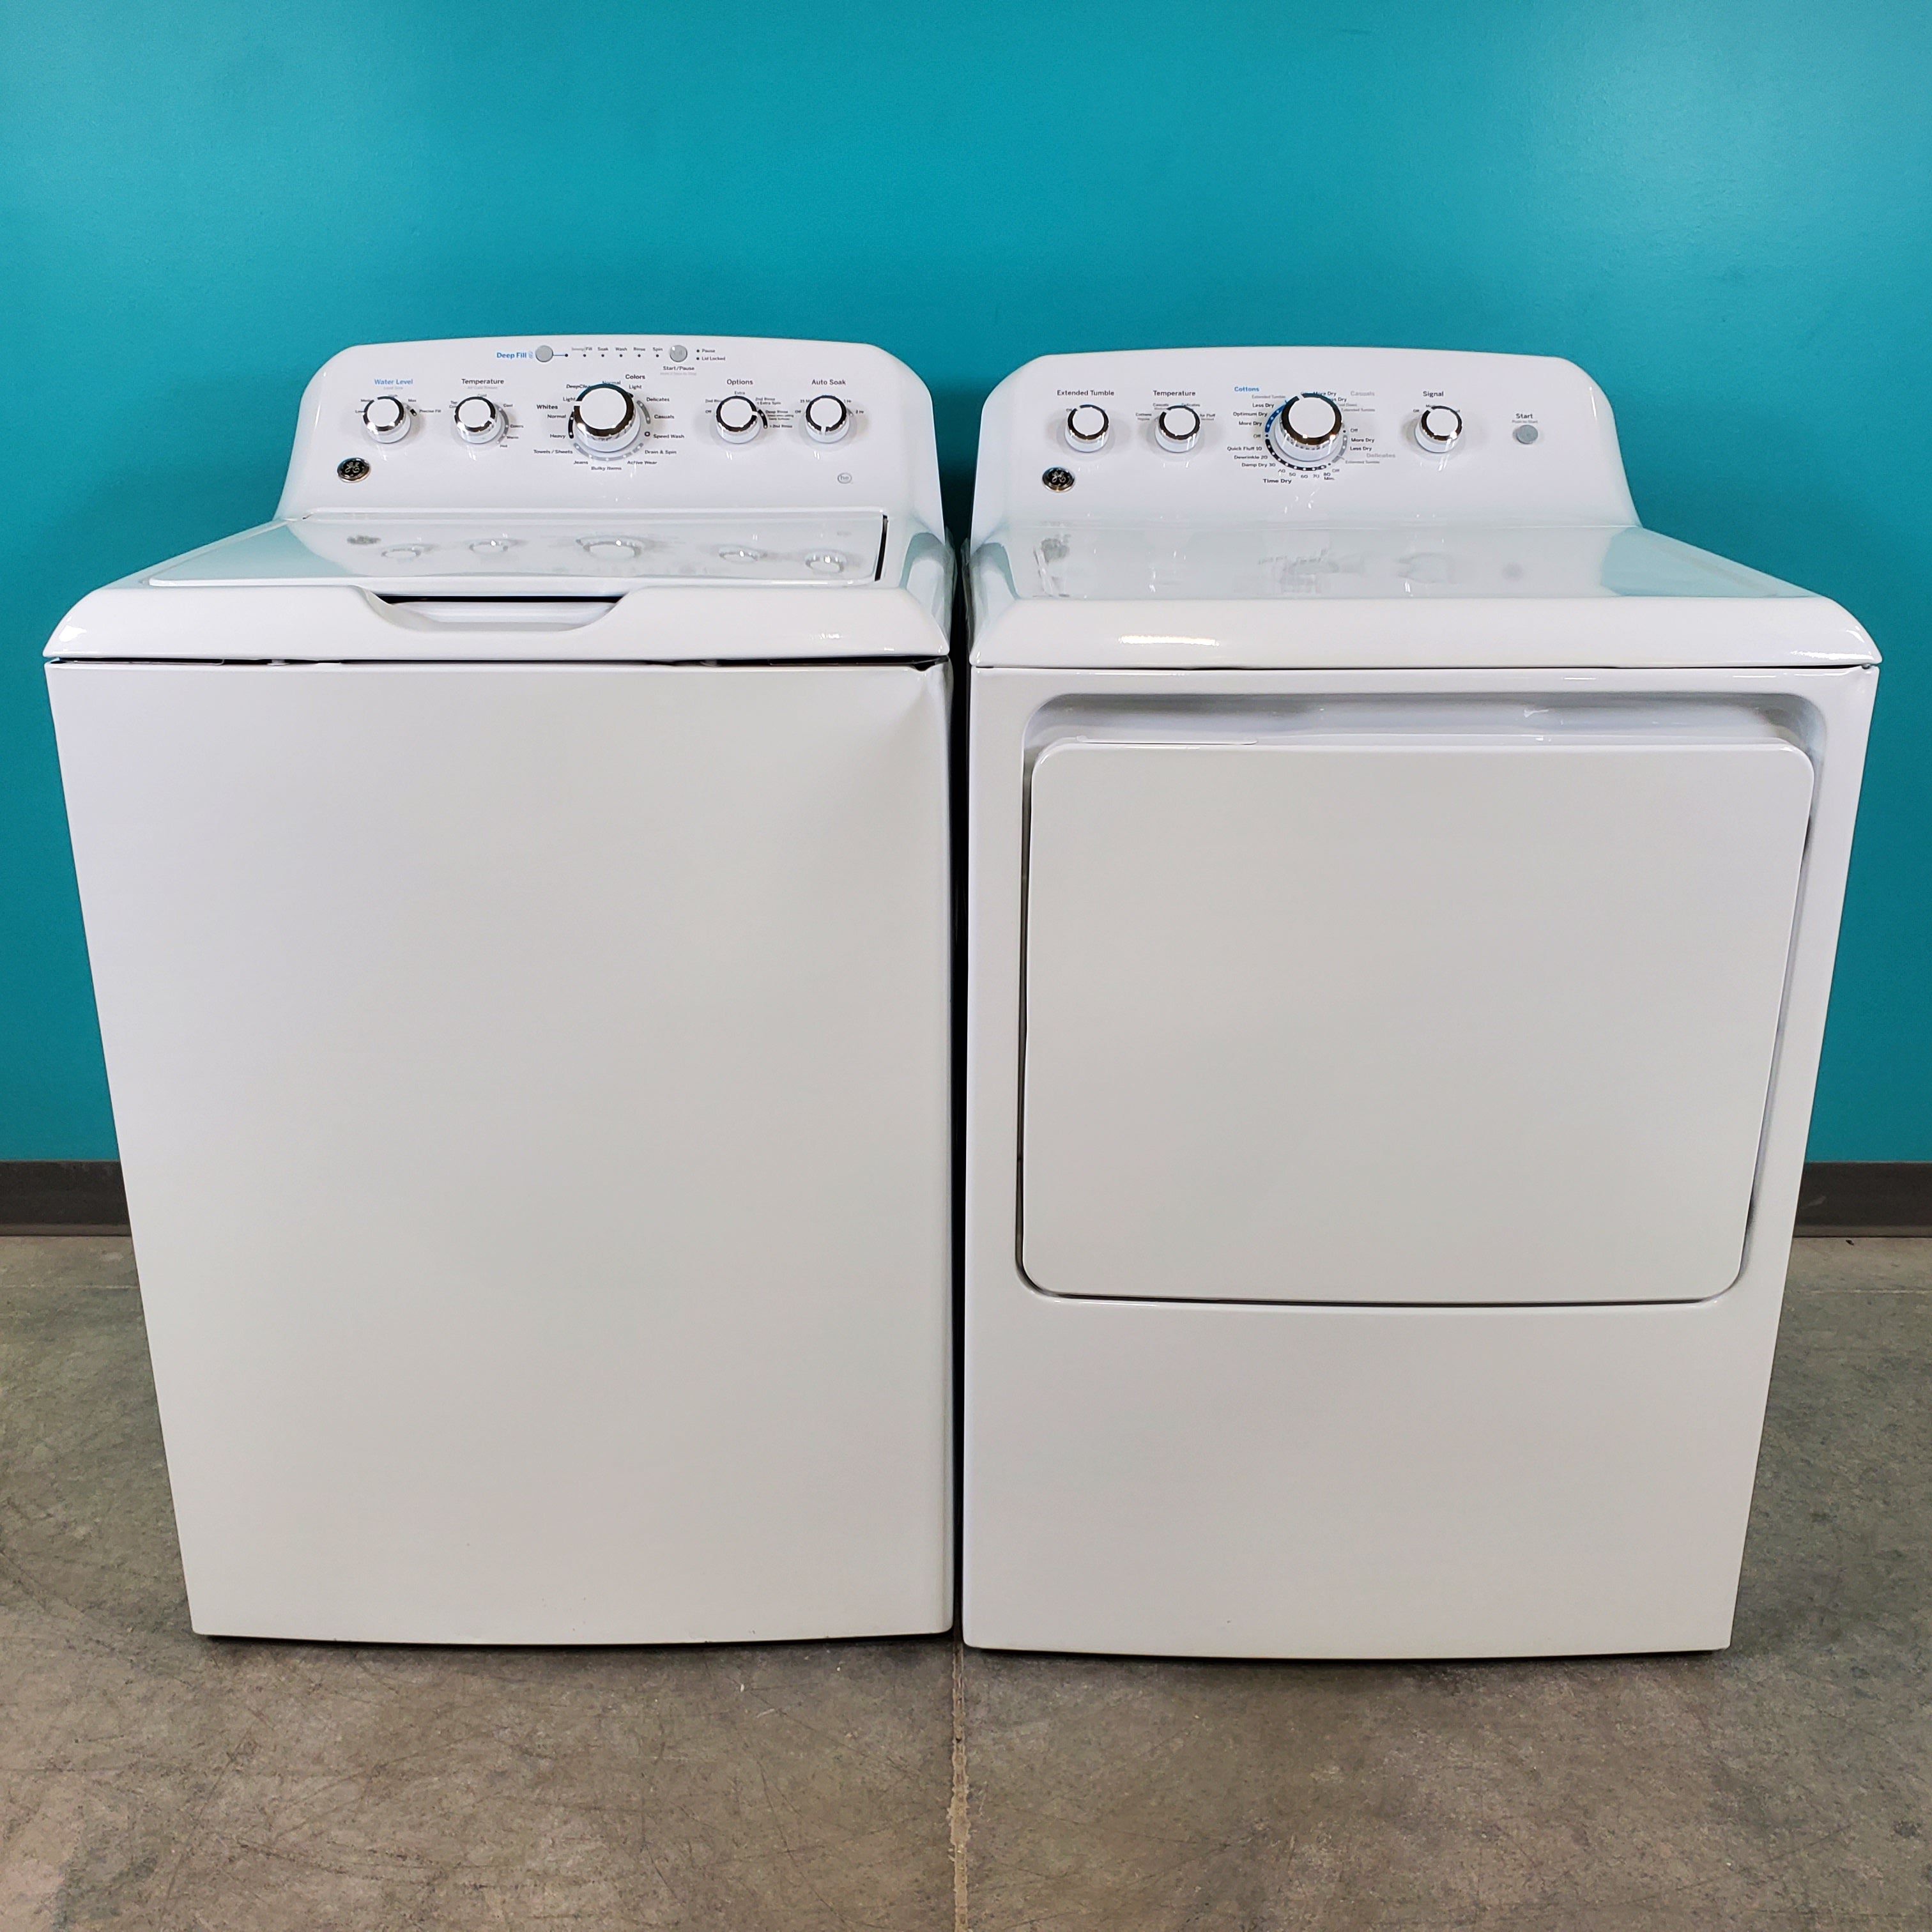 Pictures of Neu Select GE High Capacity Agitator Washer & Electric Dryer Set: 4.2 cu. ft. High Capacity Agitator Washer With Extra Water Cycle / Option & 7.2 cu. ft. Electric 220v Dryer With Auto Sensor Dry - Certified Refurbished - Neu Appliance Outlet - Discount Appliance Outlet in Austin, Tx